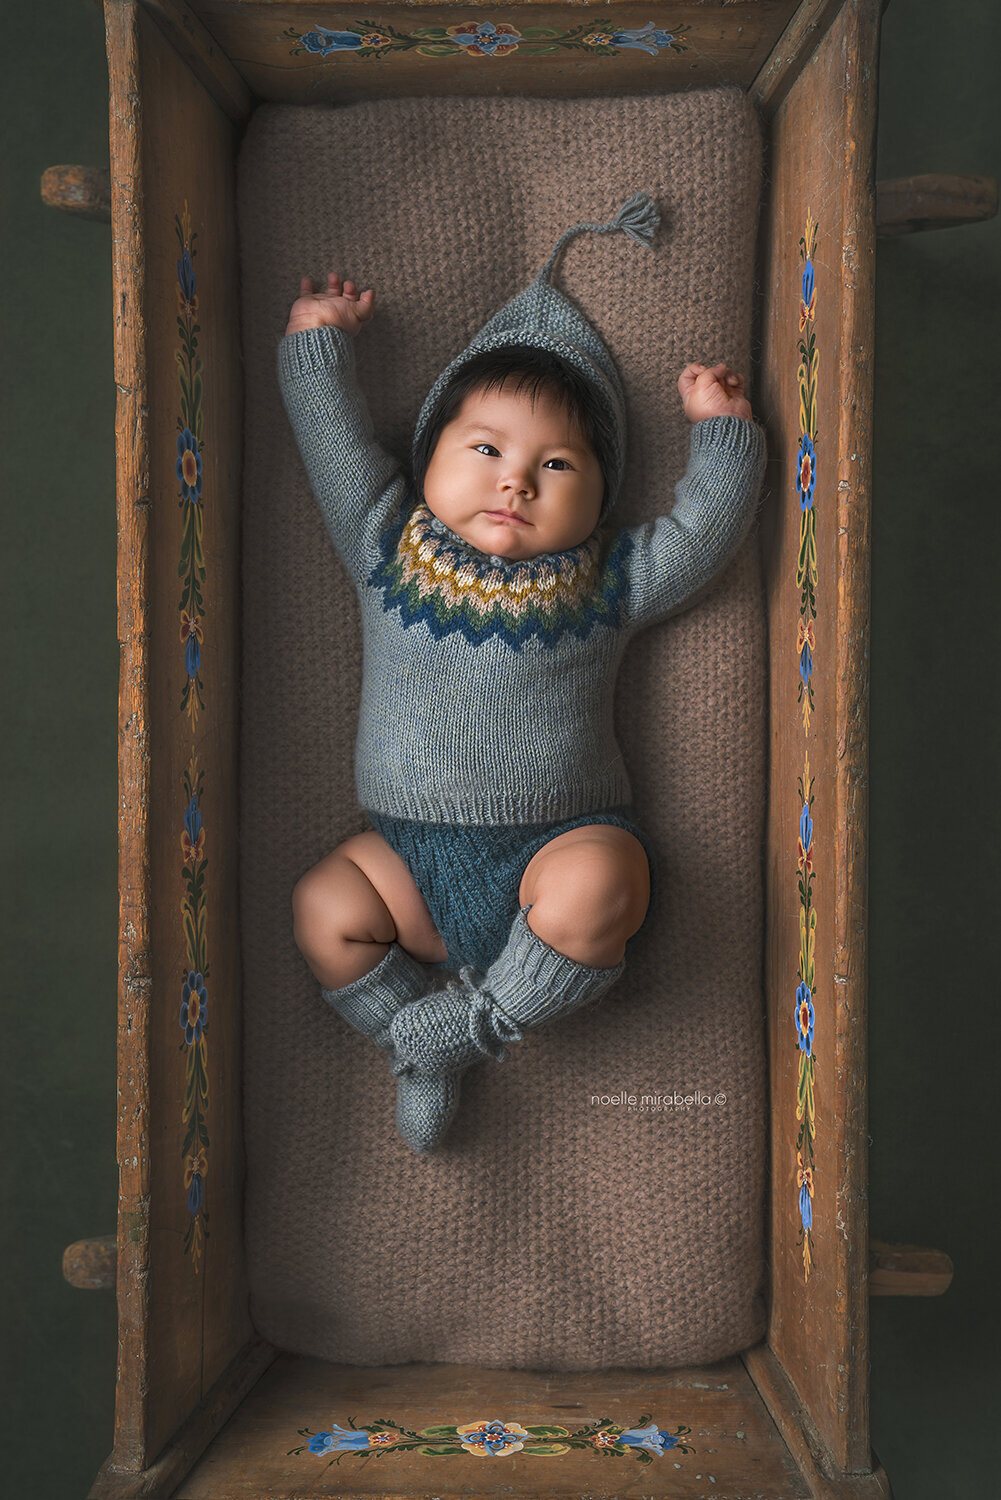 Baby stretching in a wooden cradle.